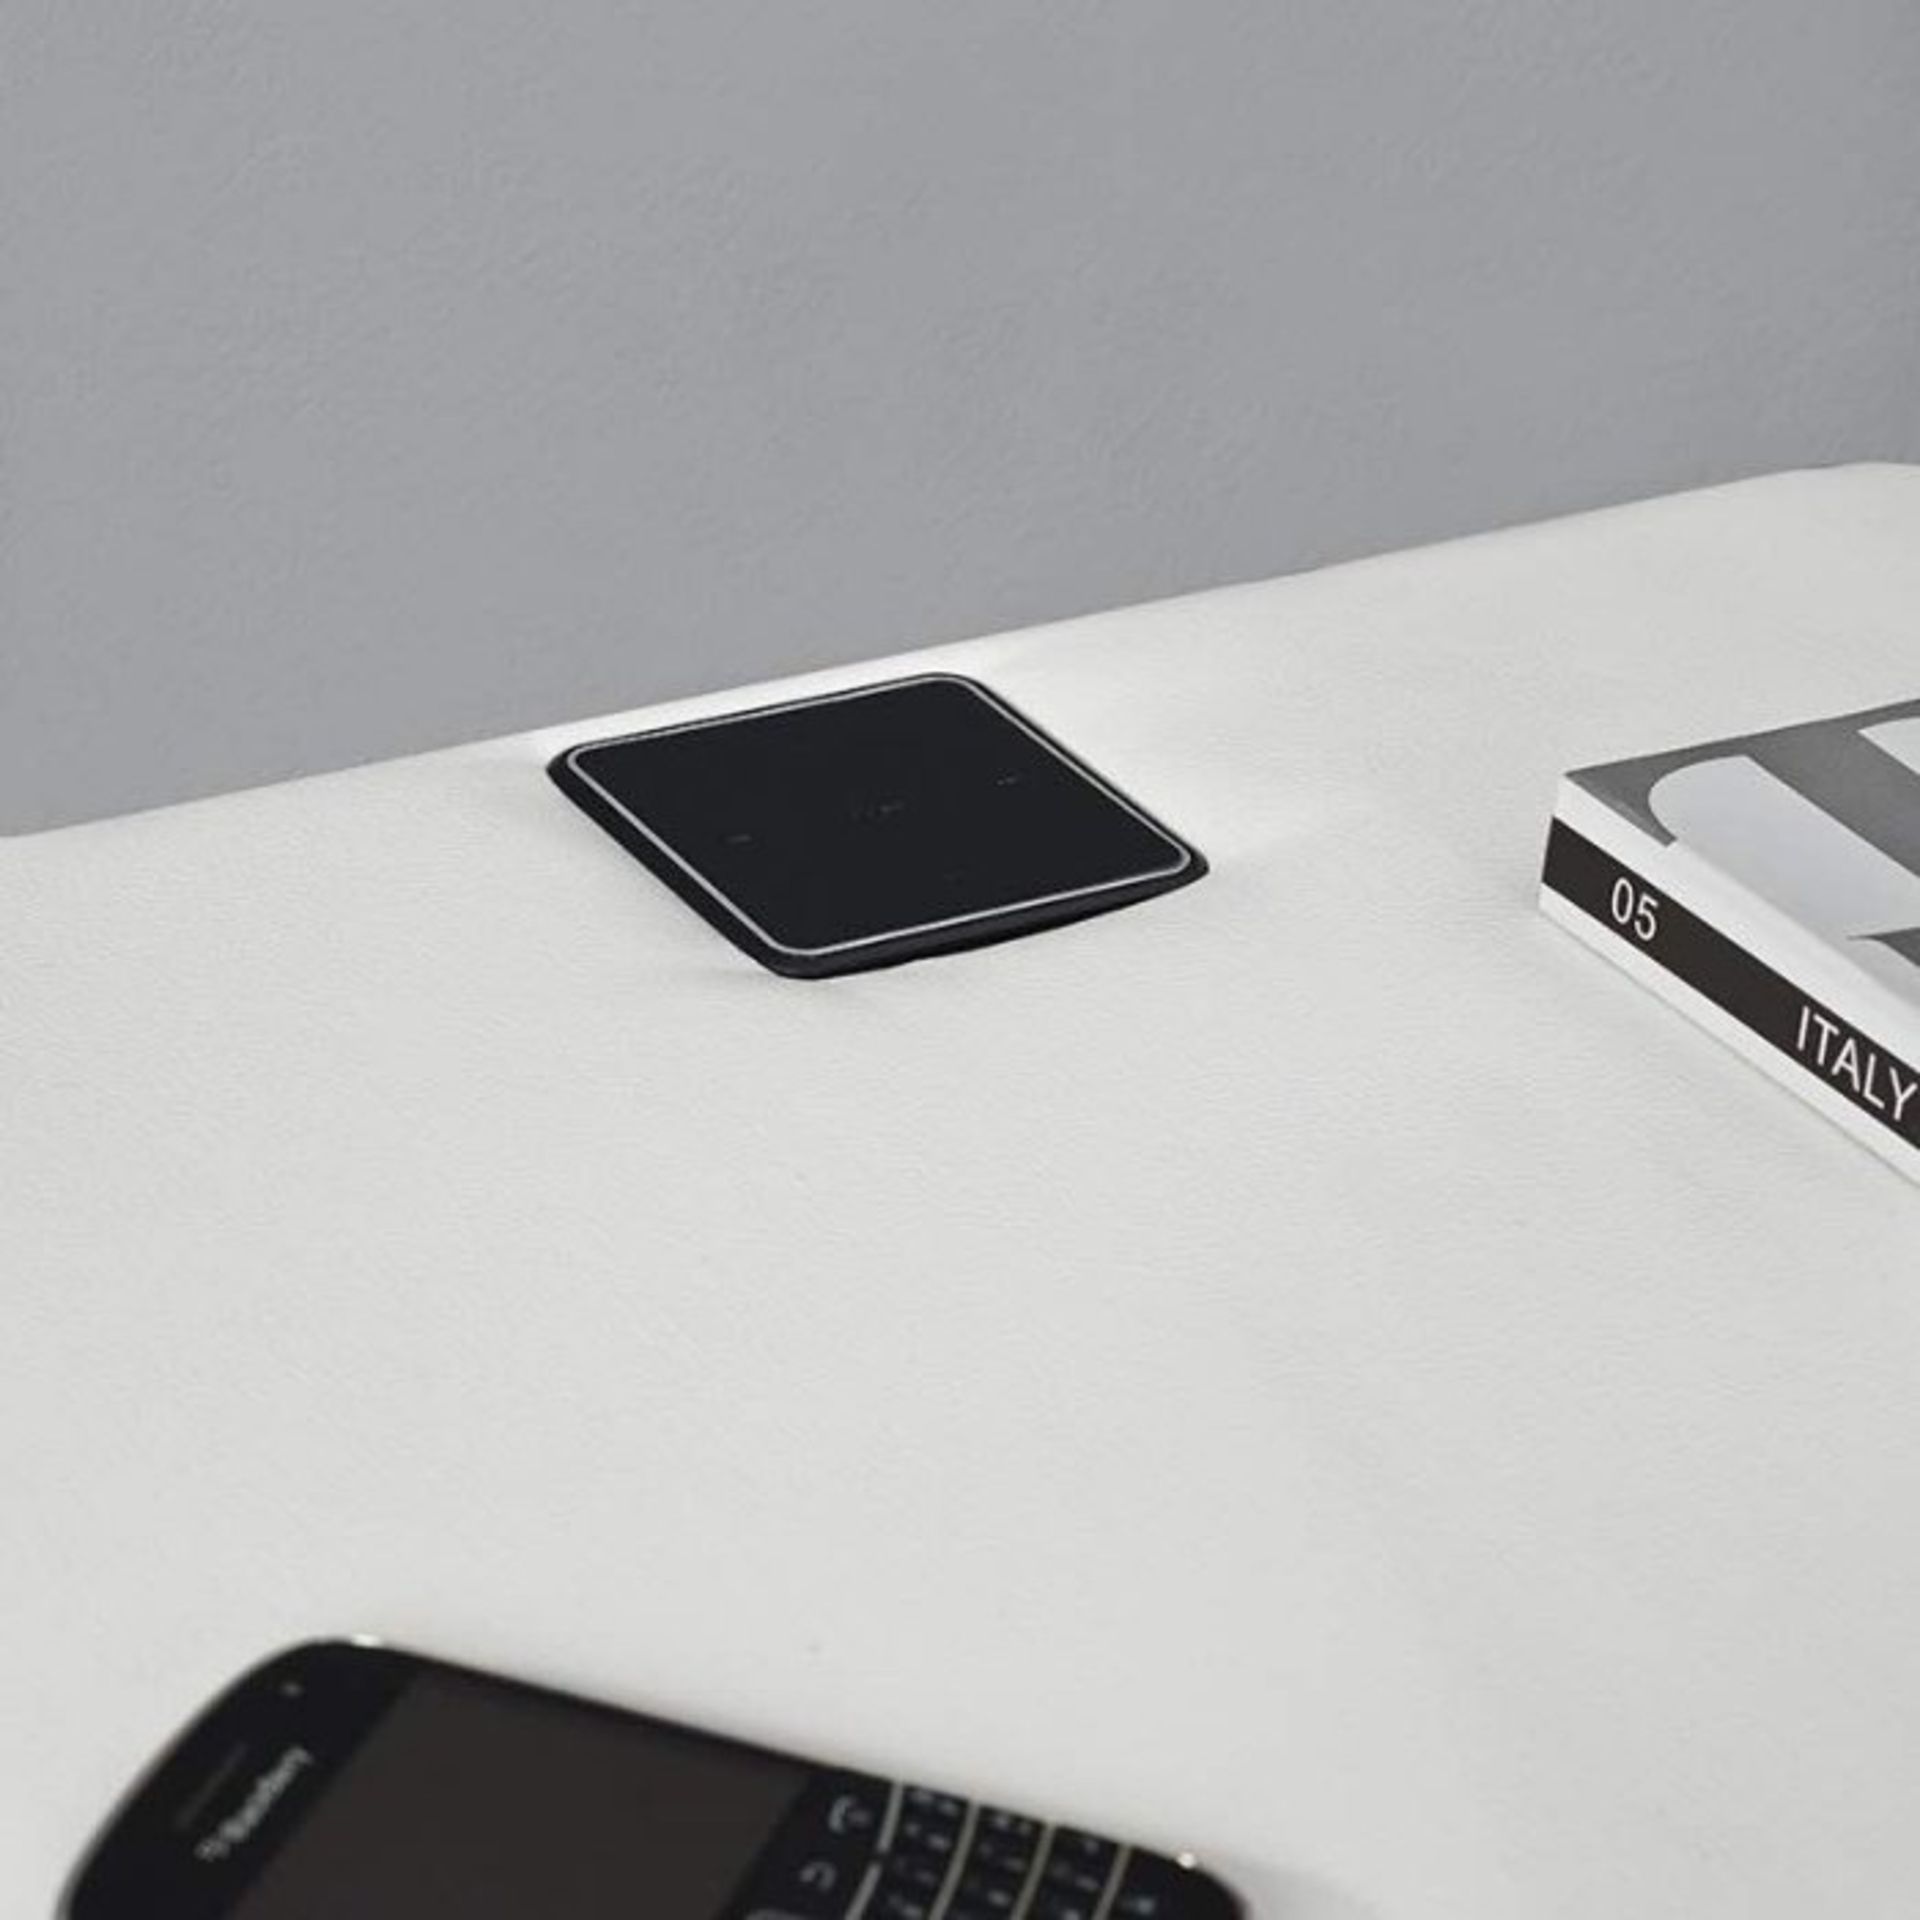 WHITE LEATHER BEDSIDE WITH BUILT IN BLUETOOTH LED SPEAKER - Image 3 of 7